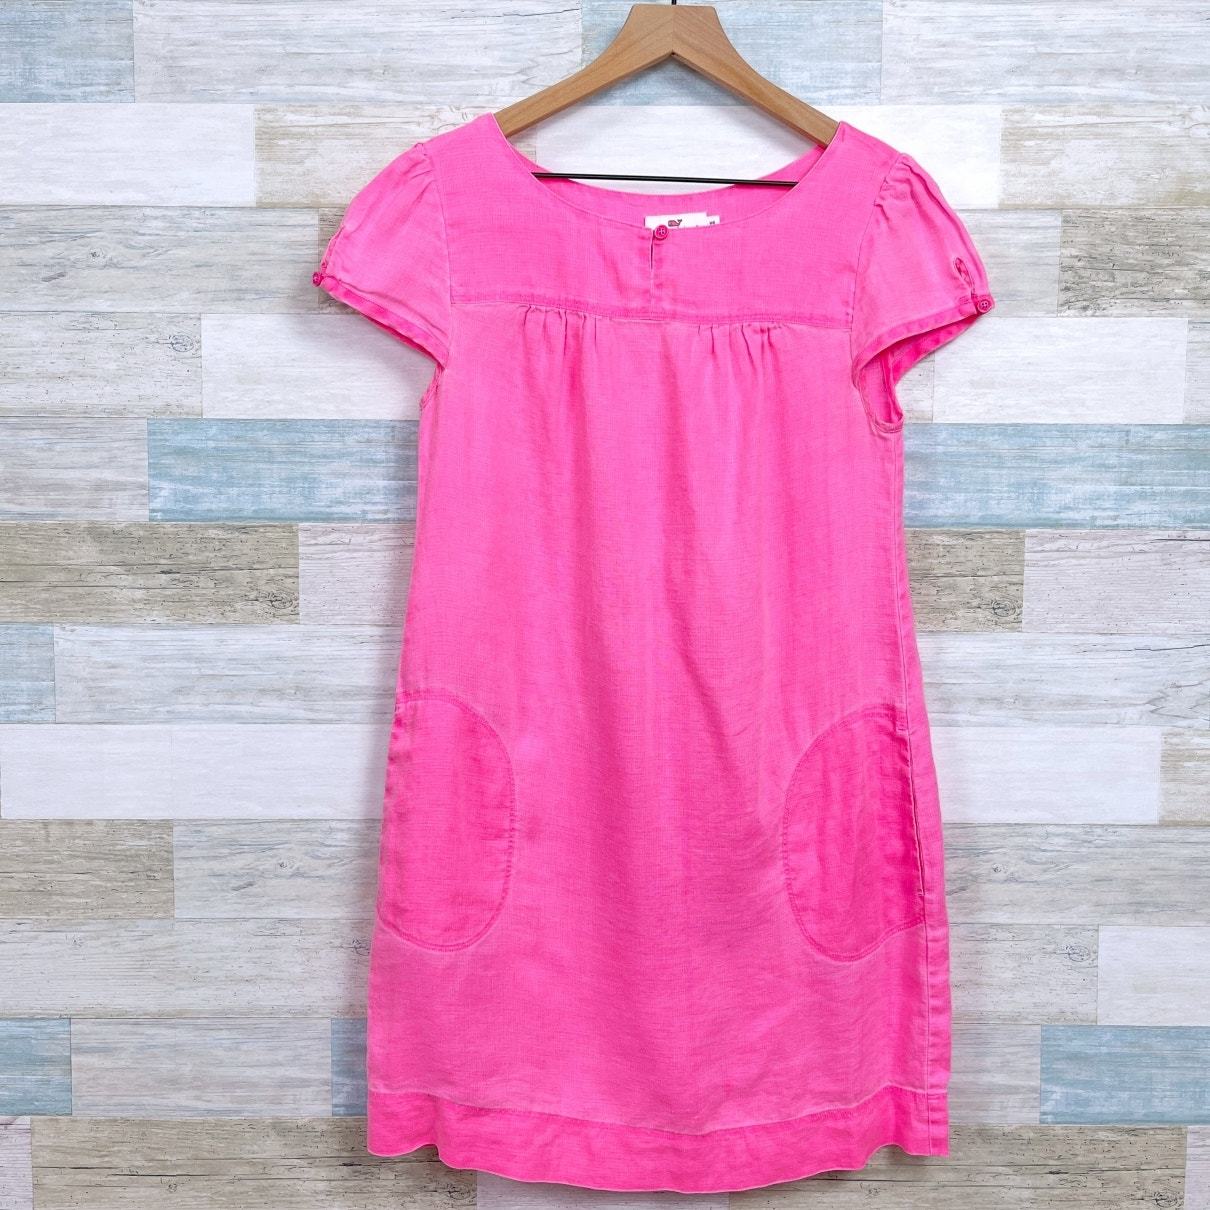 Primary image for Vineyard Vines Linen Side Pocket Shift Dress Pink Short Sleeve Casual Womens XS